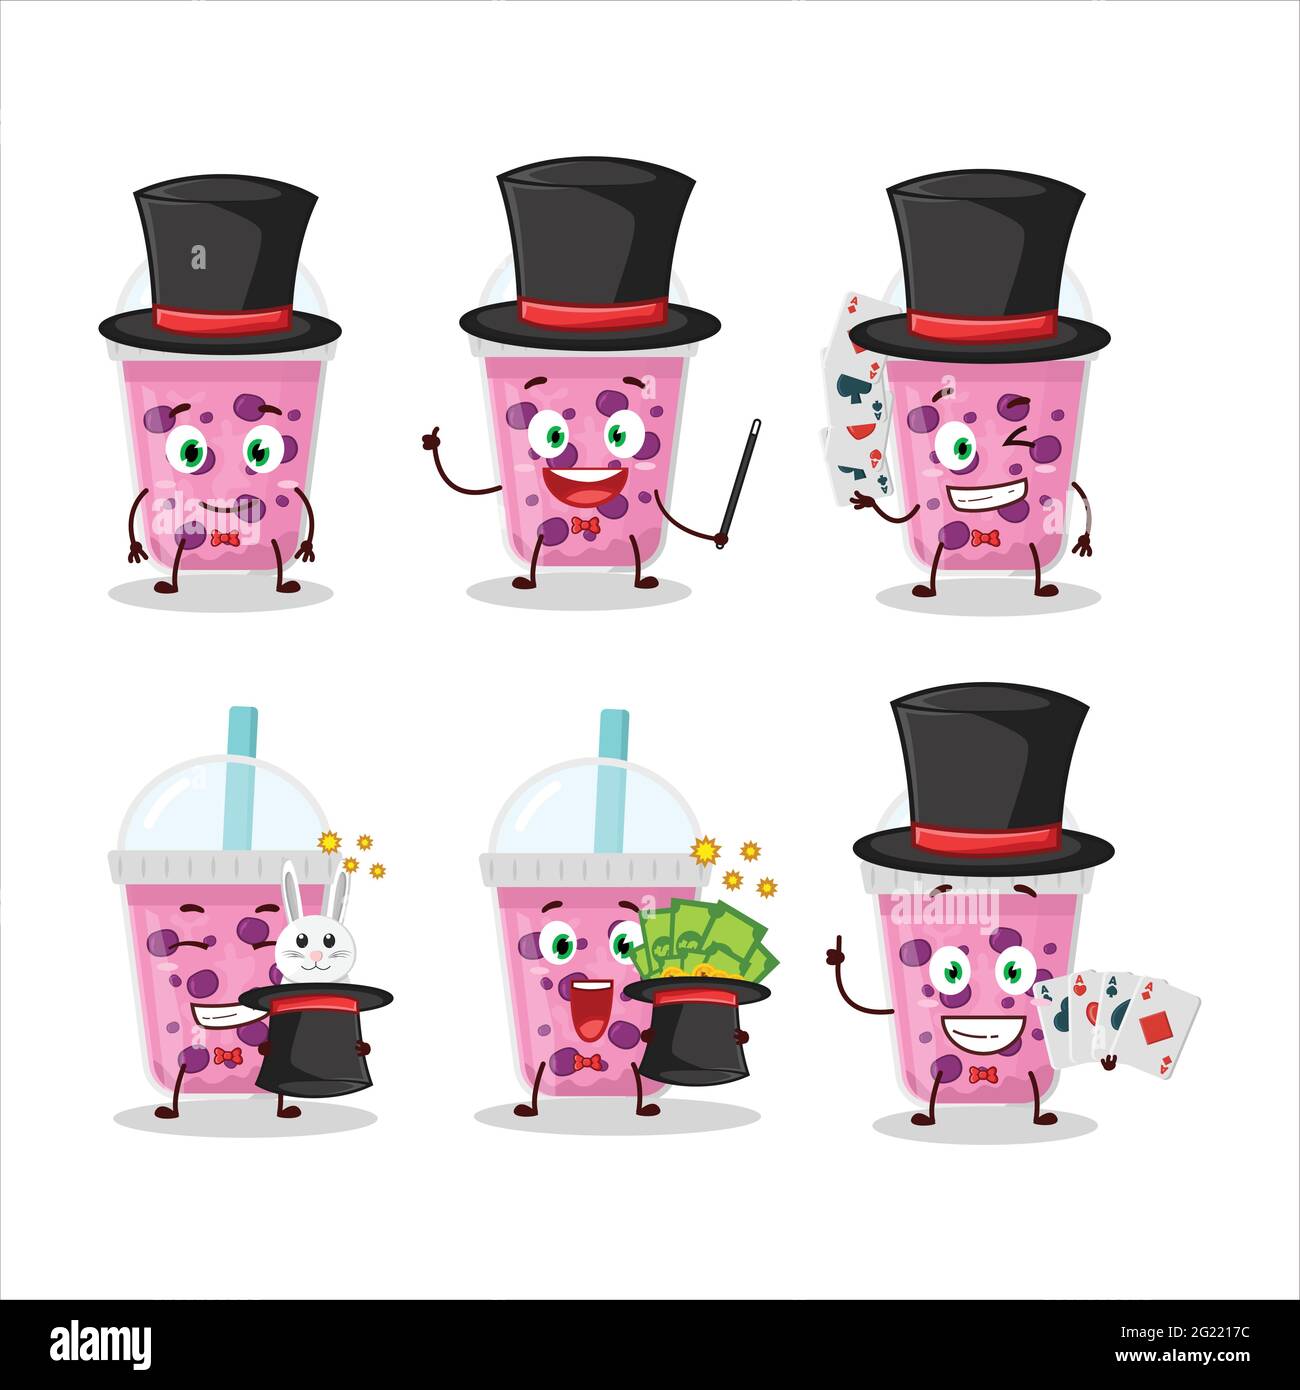 https://c8.alamy.com/comp/2G2217C/a-grapes-milk-with-boba-magician-cartoon-character-perform-on-a-stage-vector-illustration-2G2217C.jpg